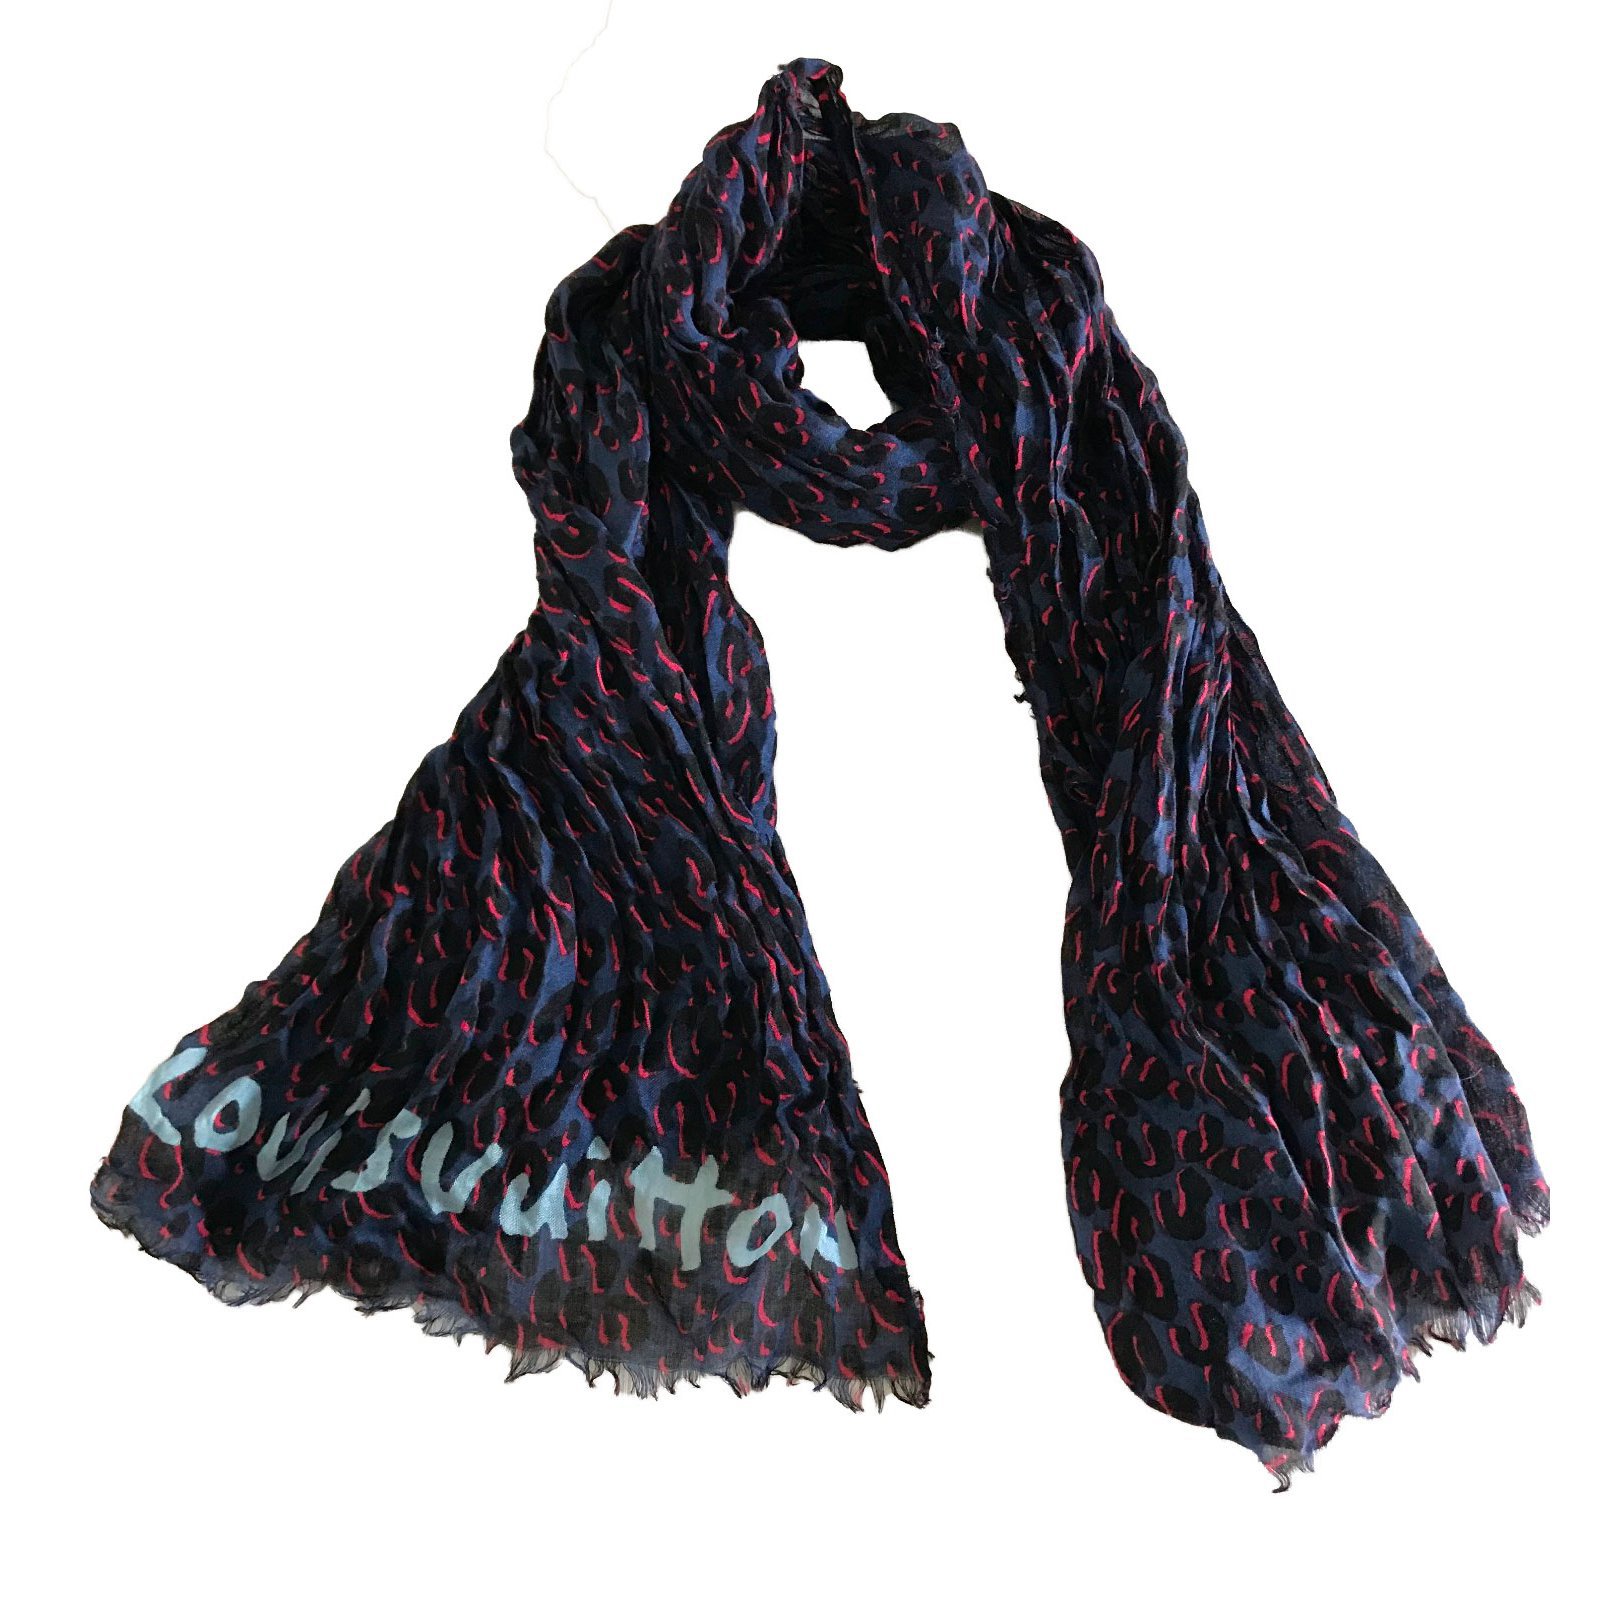 Louis Vuitton Stephen Sprouse Scarf In Women's Scarves & Wraps for